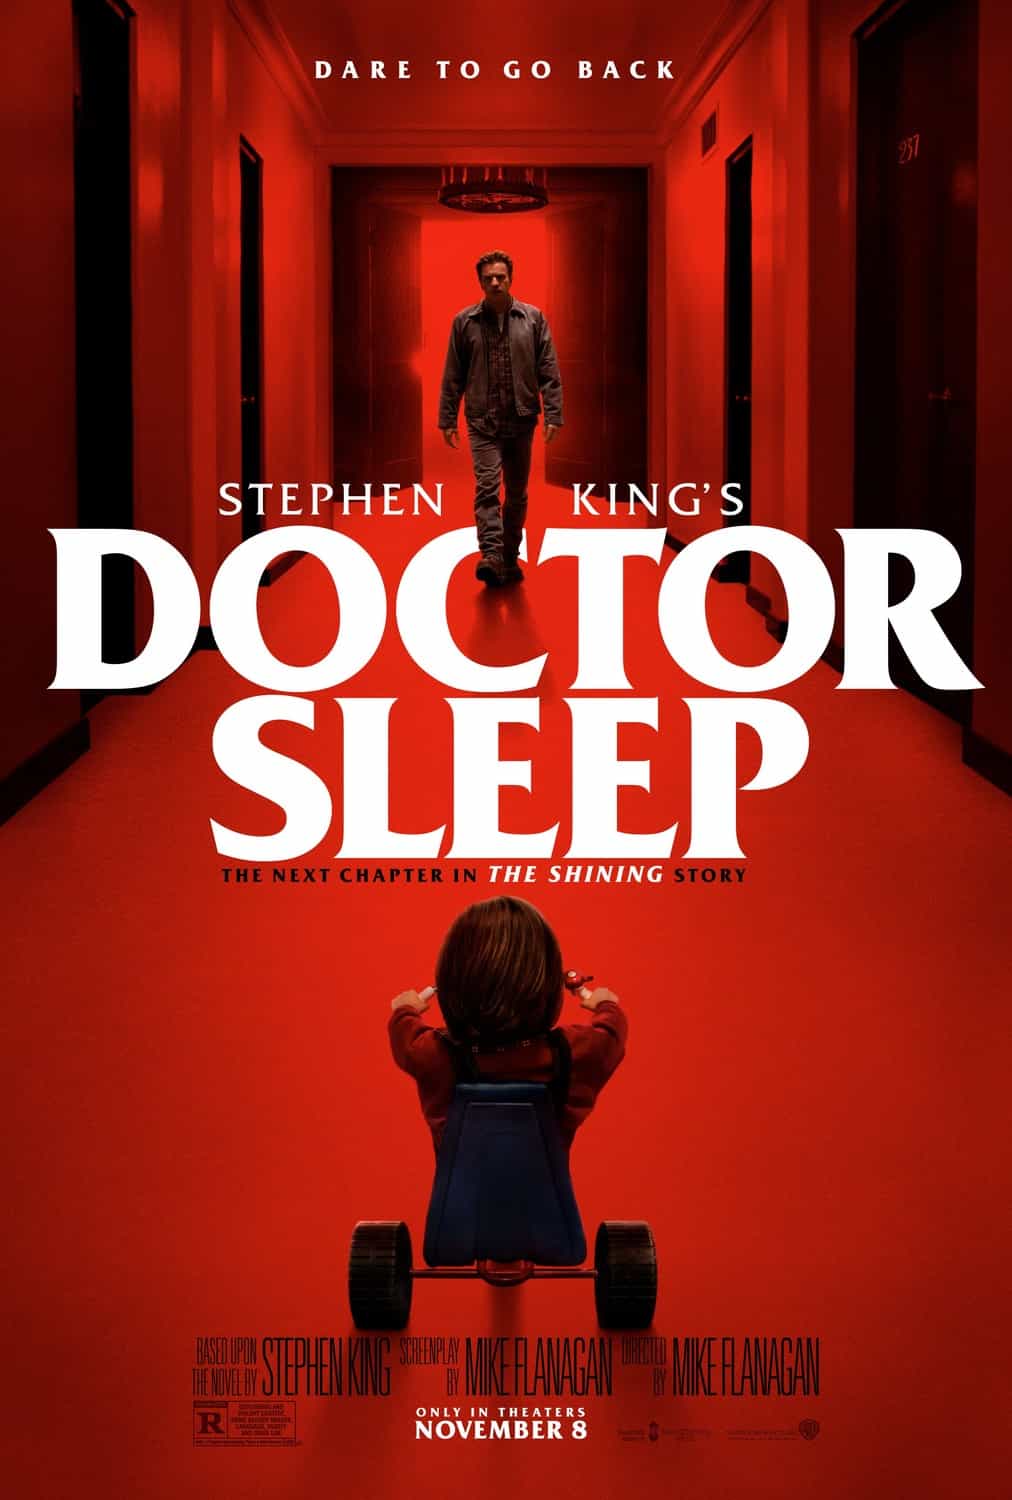 UK box office preview for weekend Friday, 1st November 2019 - Doctor Sleep, Brittany Runs A Marathon, Western Stars and Sorry We Missed You